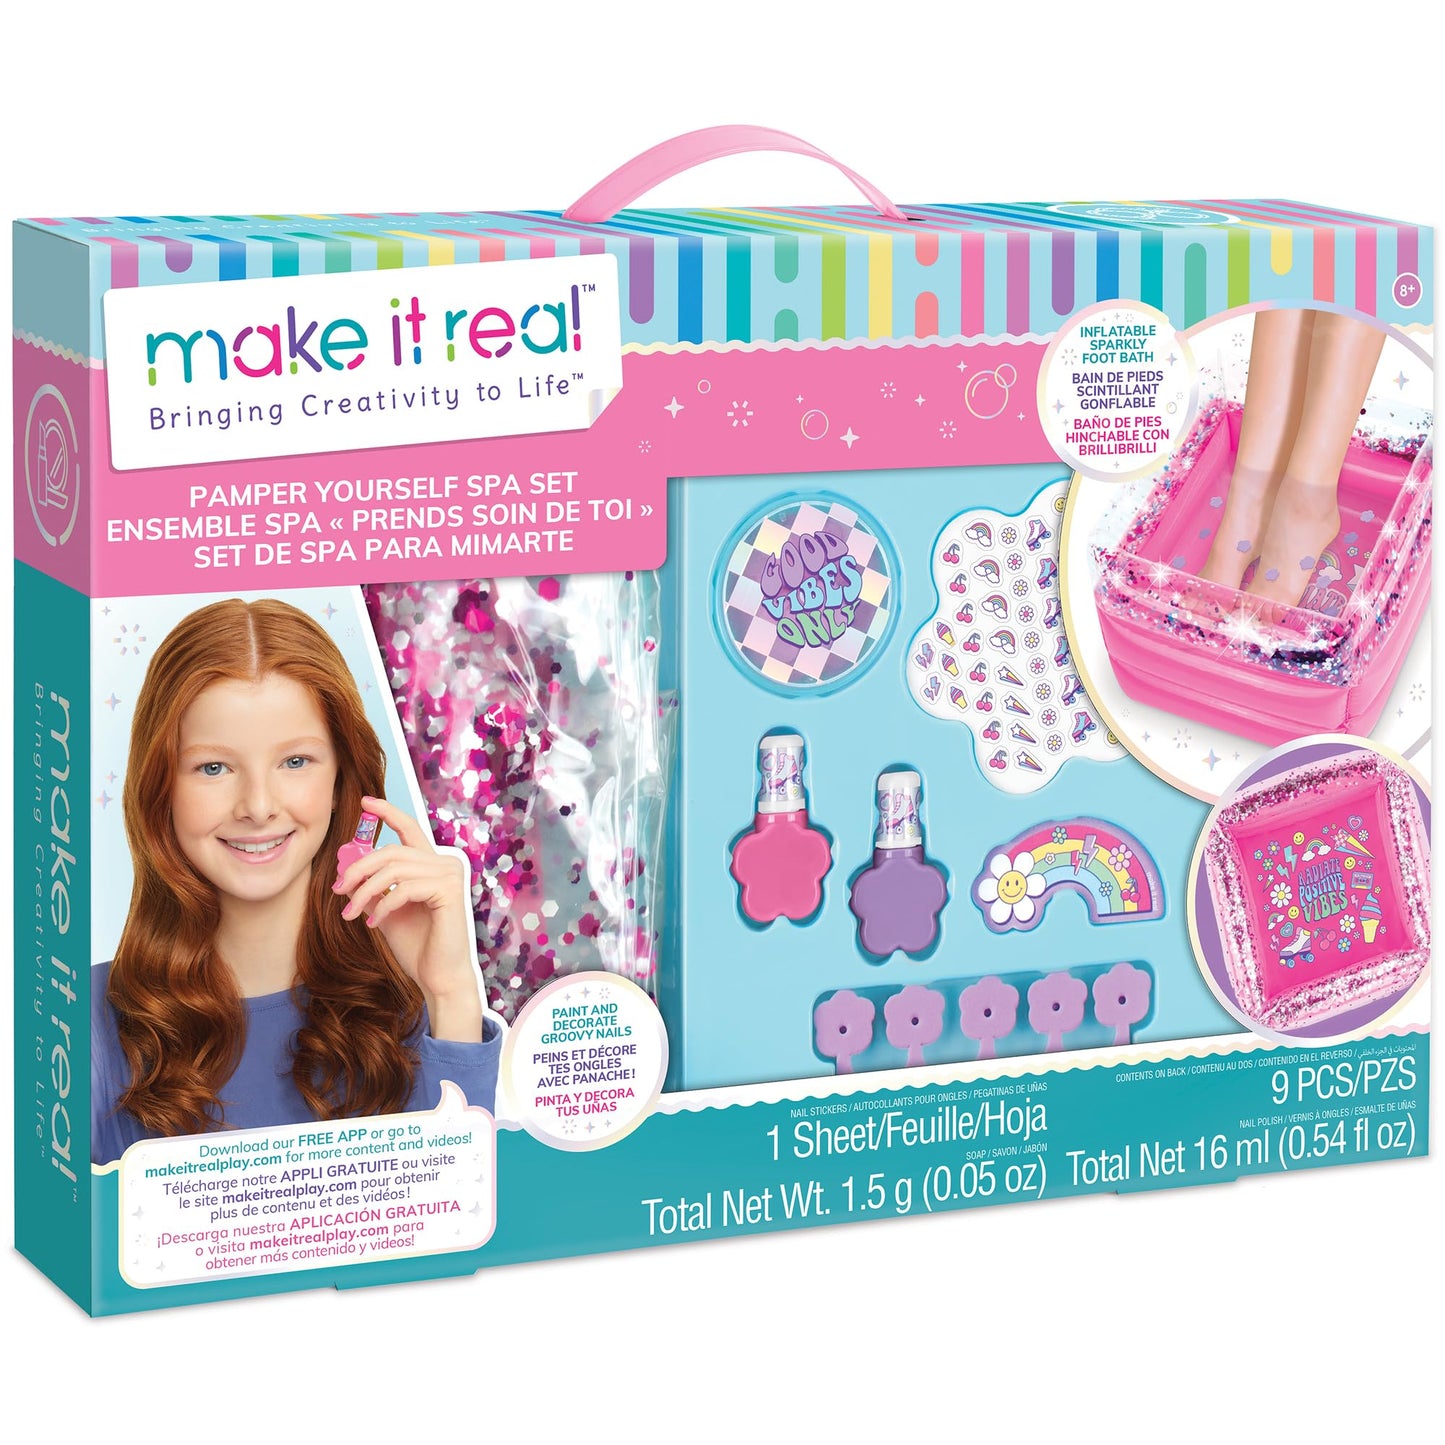 Make It Real: Pamper Yourself Spa Set - 9 pcs, Inflatable Sparkly Foot Bath & Accessories, Nail Polish & Art, Tweens, Girls & Kids Ages 8+